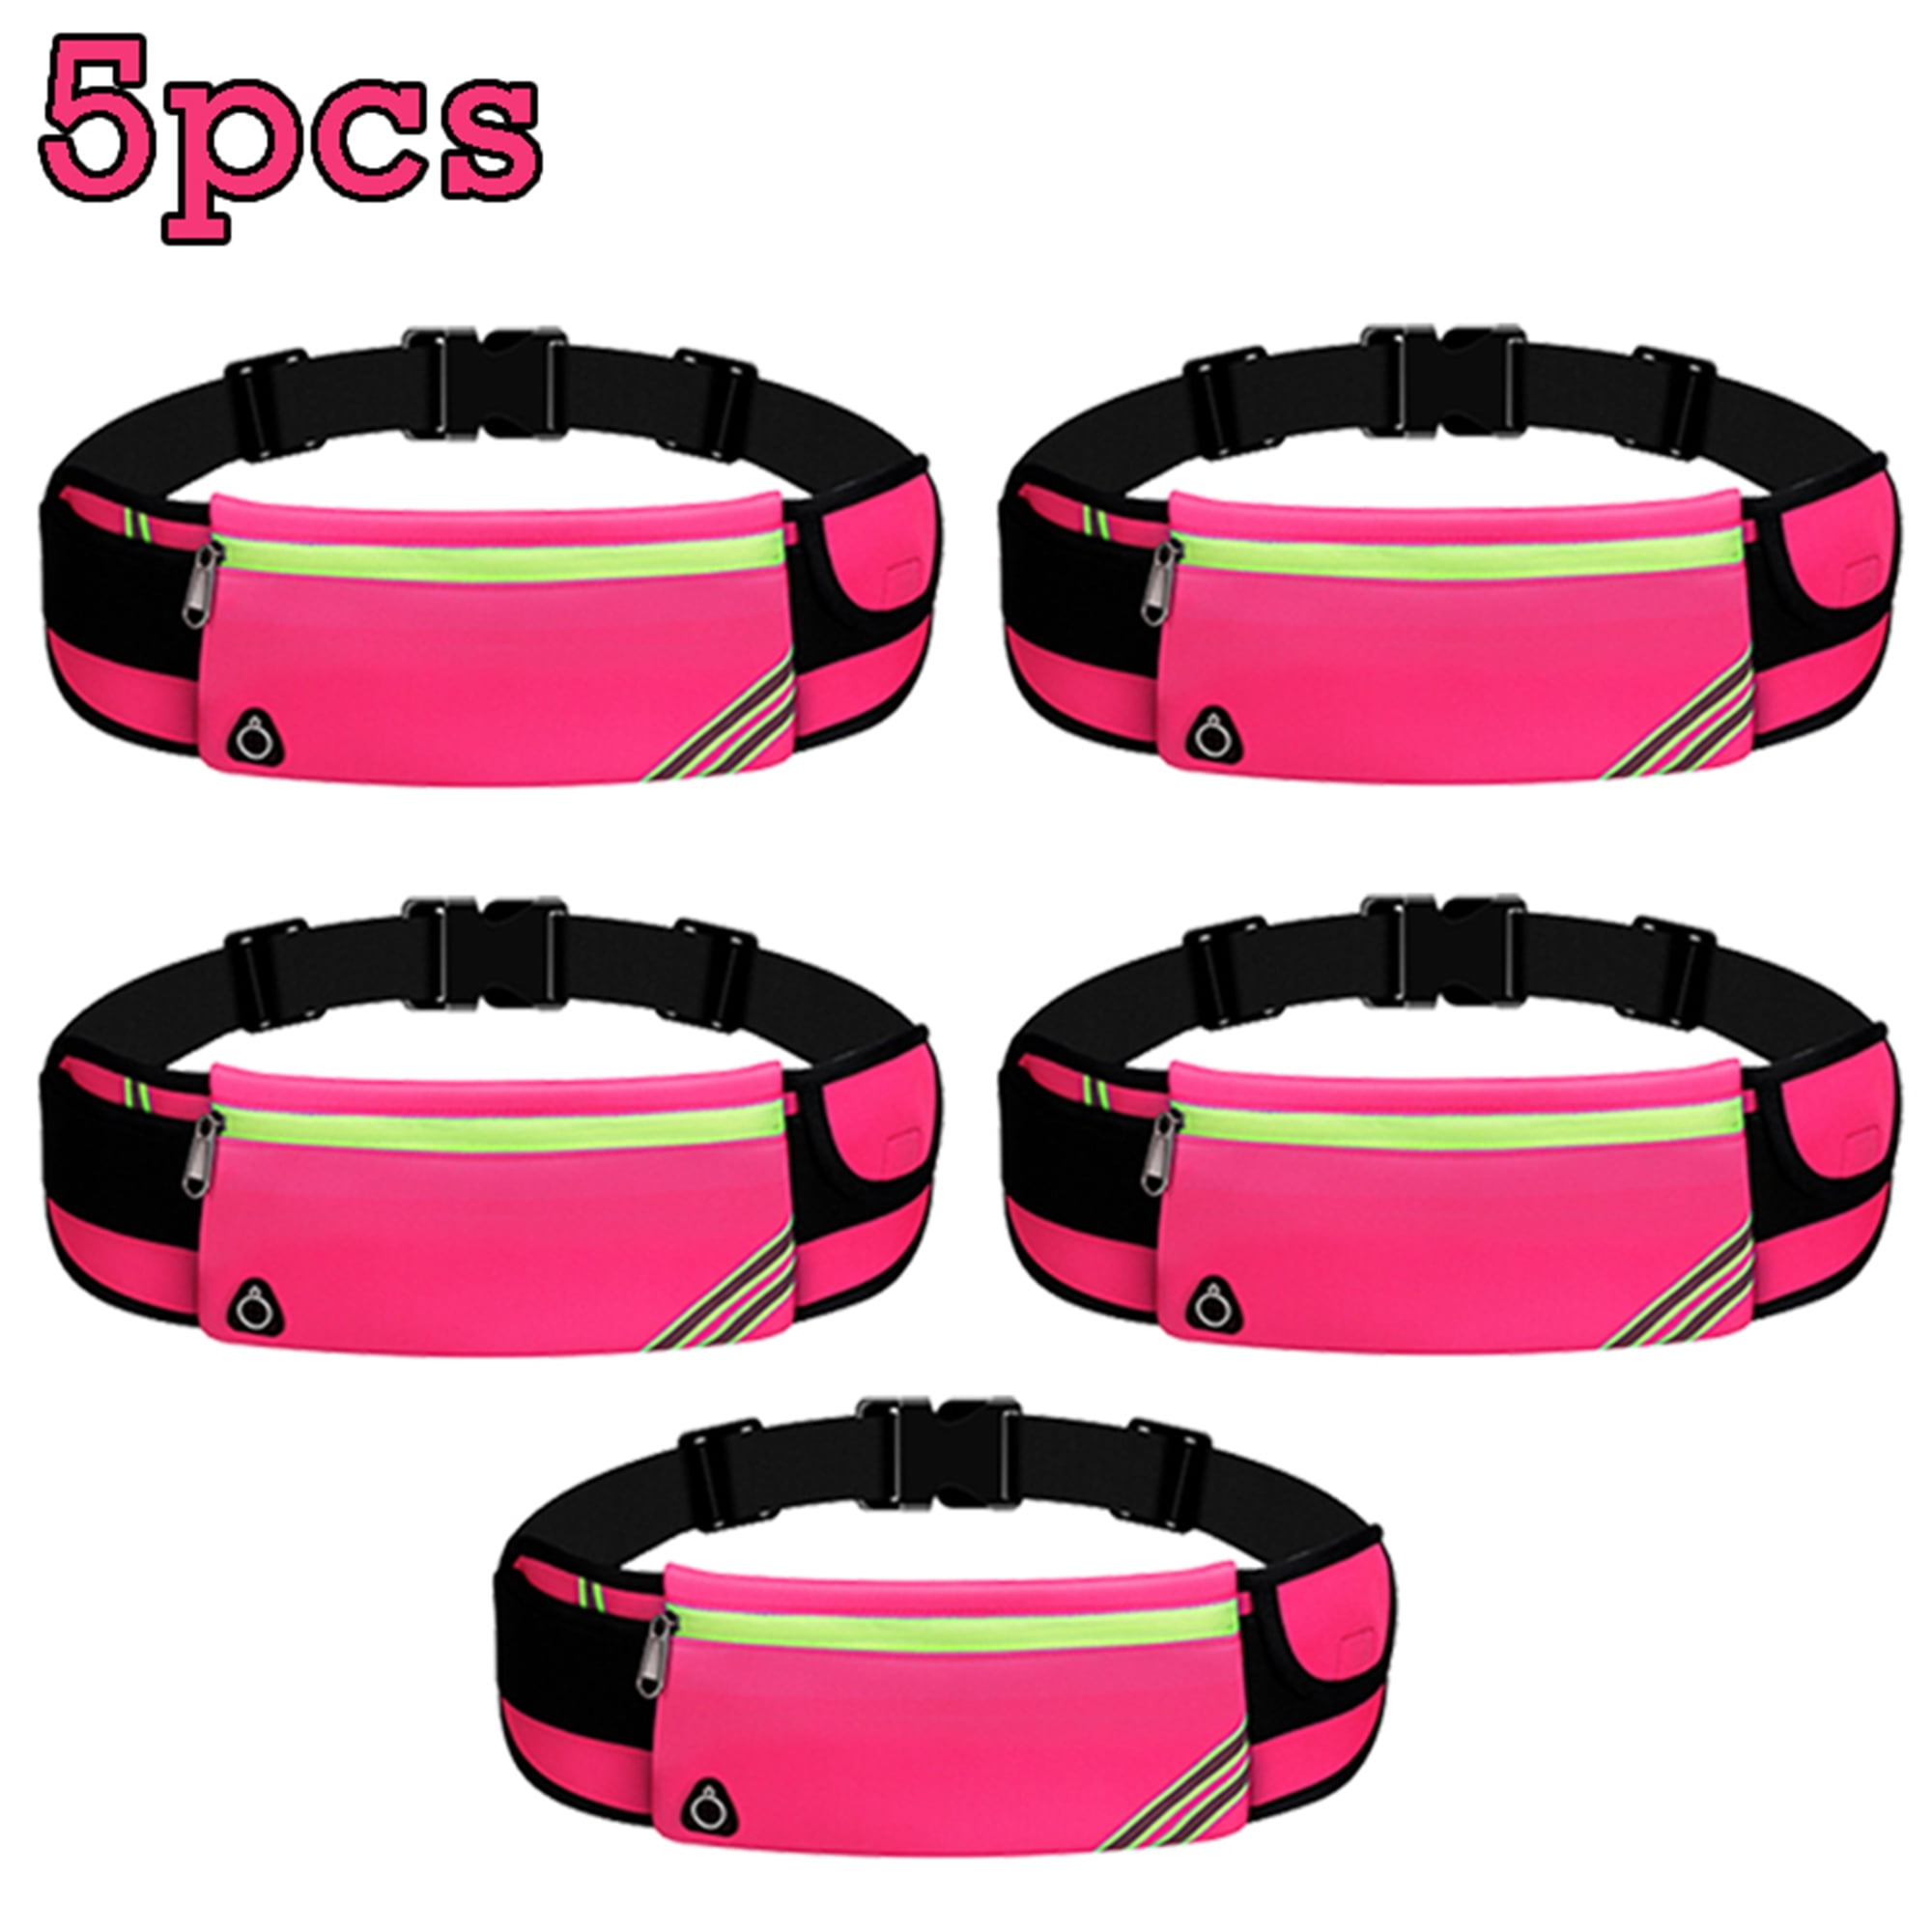 1/2/5 Pieces Fanny Pack Running Belt - Red Rose, Elbourn Rose Red Running Belt Waist Pack Bag for Running Accessories for iPhone 11 12 Pro Max(Wholesale) -